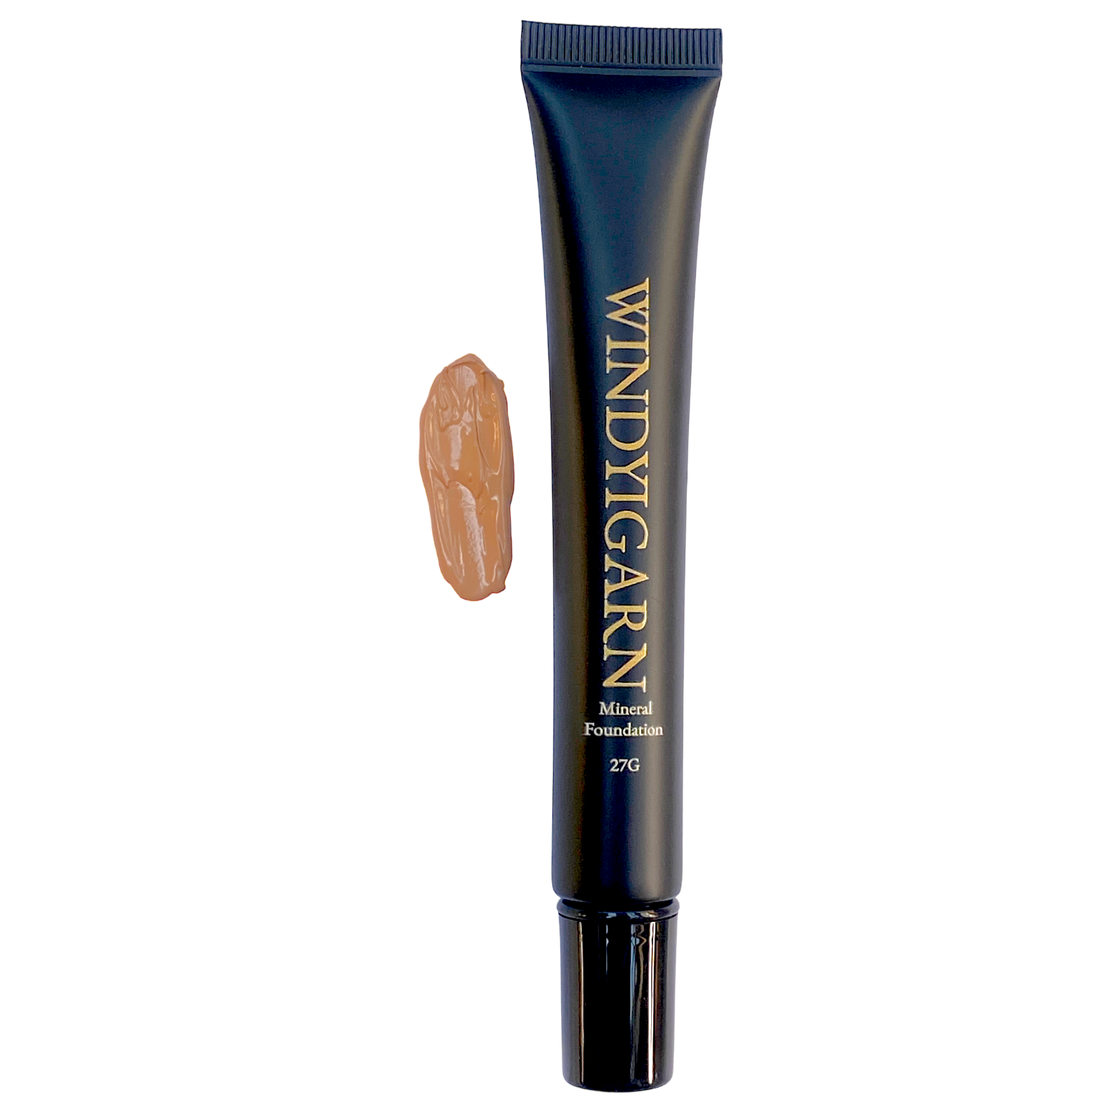 Mineral Foundation: Full Cover